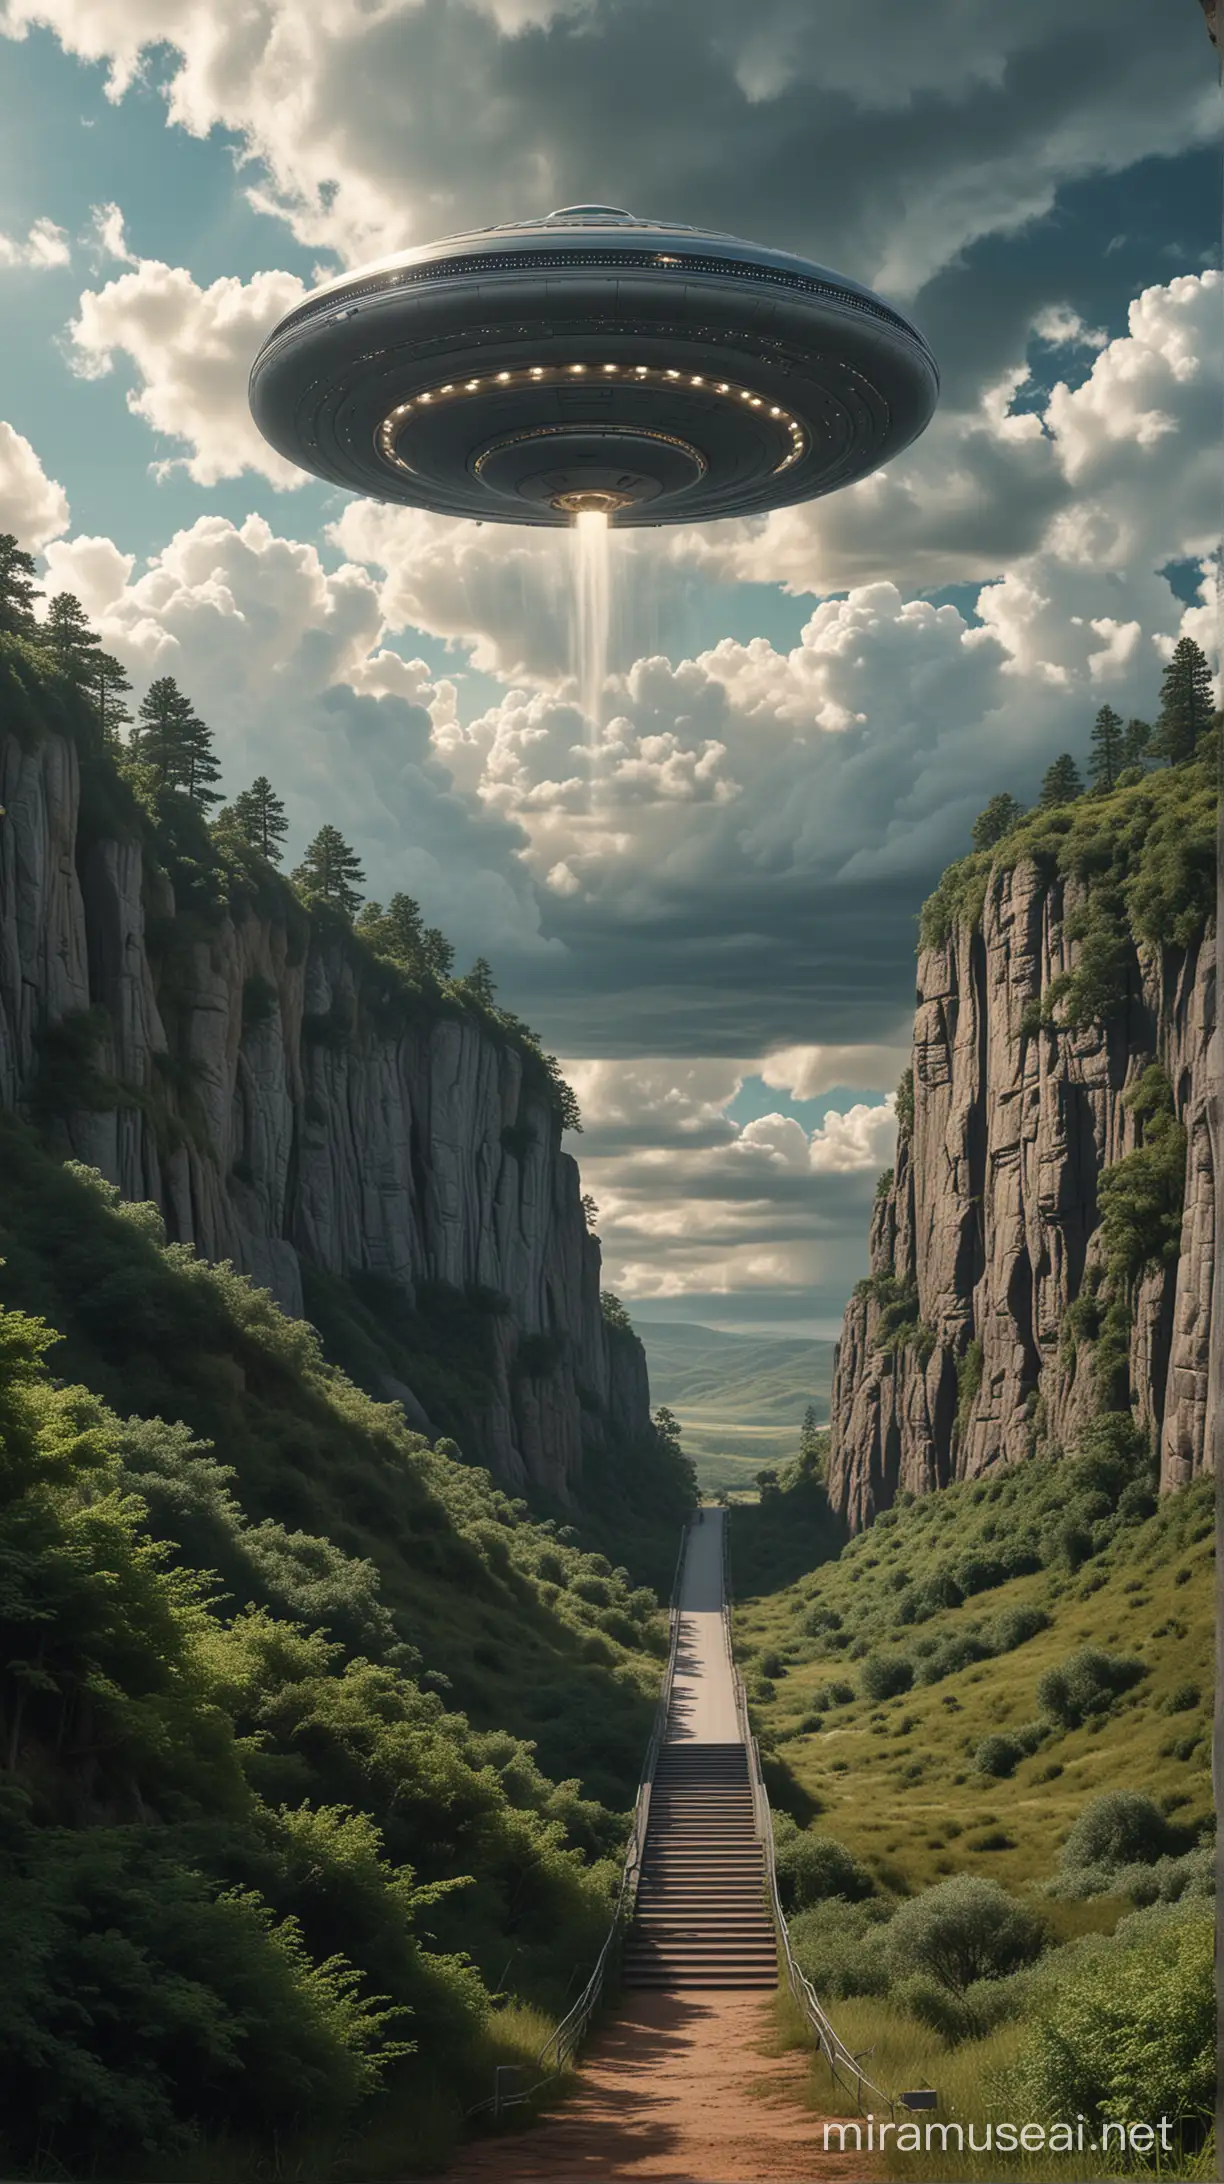 In this captivating and detailed scene, former President Donald Trump is depicted stepping down a grand staircase from a massive, otherworldly UFO. The setting is a serene countryside landscape, with lush greenery and a clear sky dotted with a few fluffy clouds. The UFO, metallic and sleek, stands prominently against the natural backdrop. Make Donald Trump from very close up 